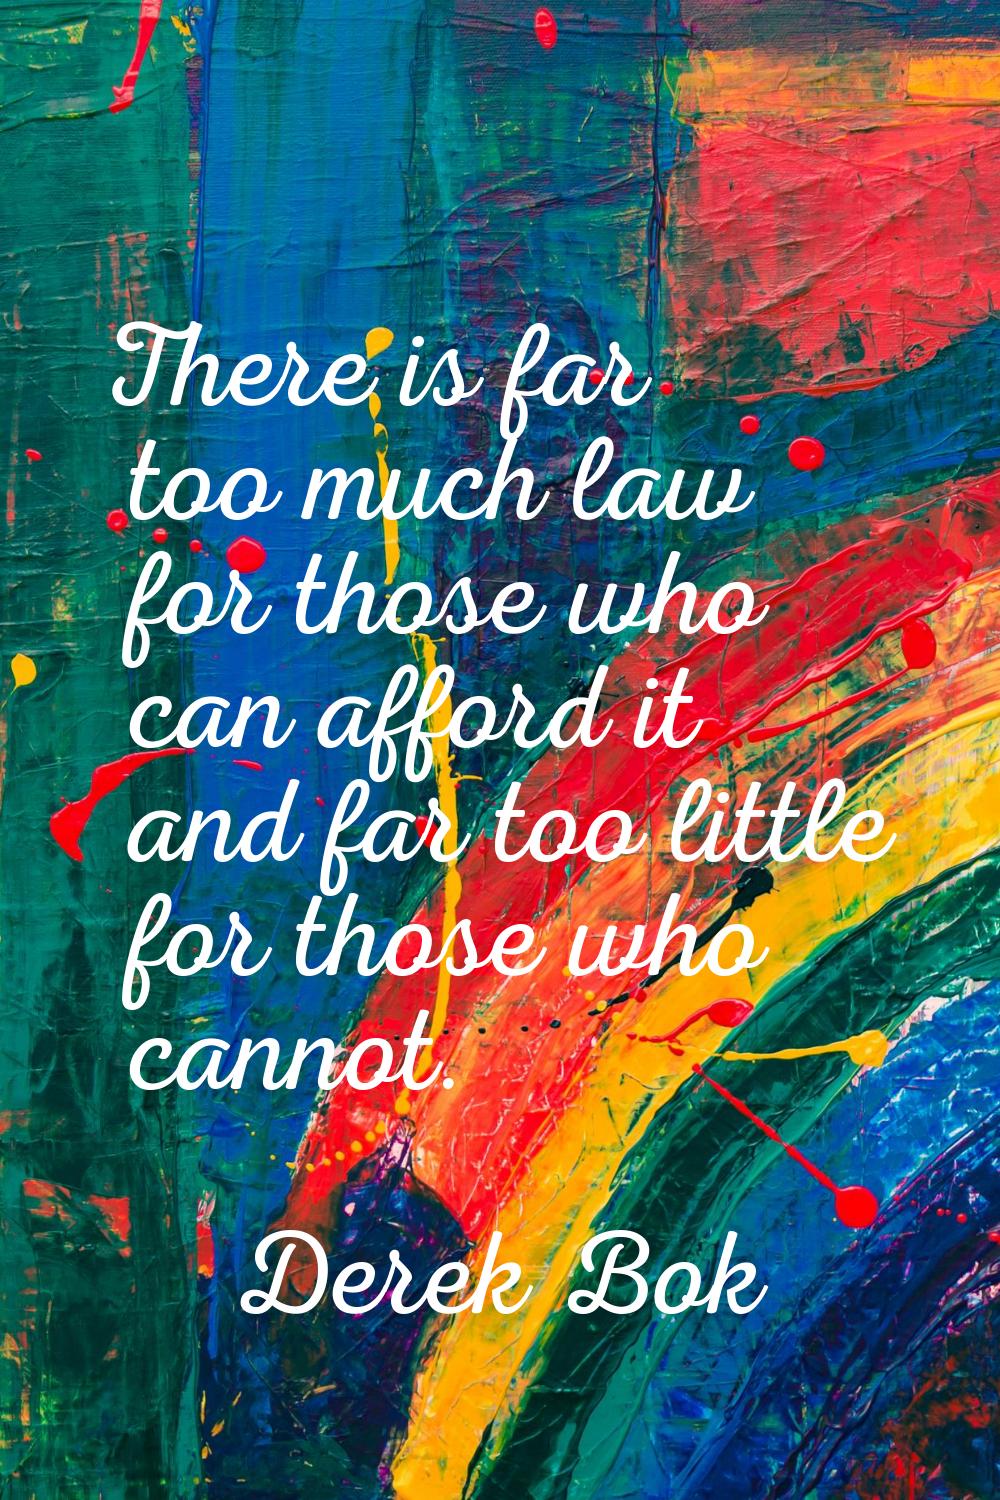 There is far too much law for those who can afford it and far too little for those who cannot.